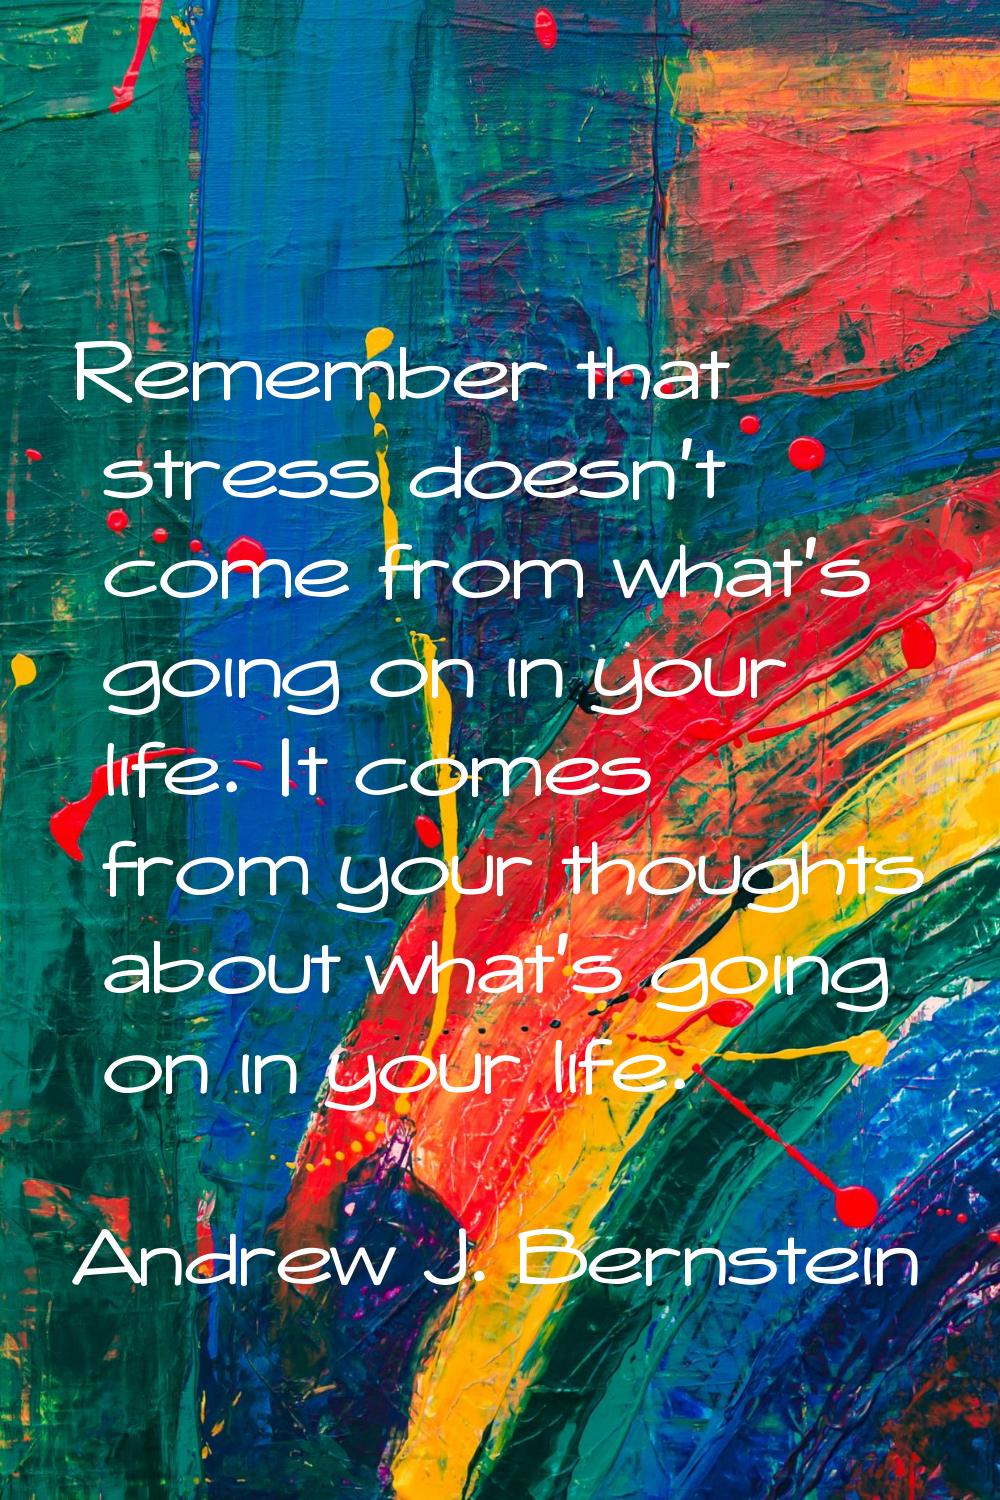 Remember that stress doesn't come from what's going on in your life. It comes from your thoughts ab